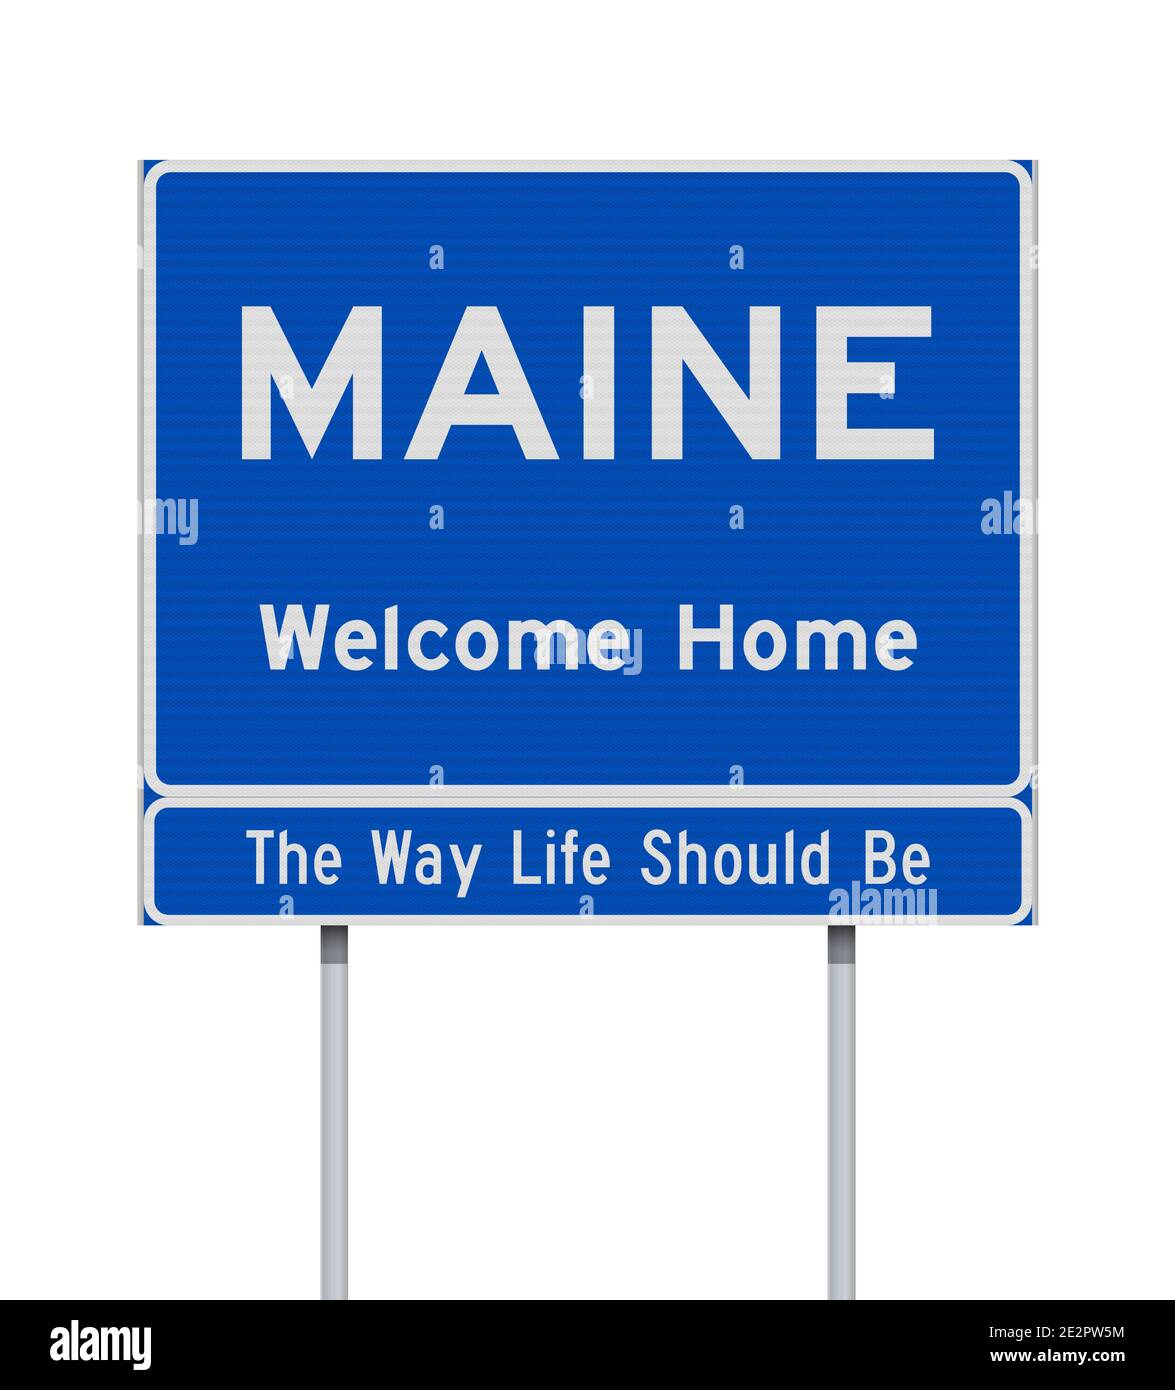 Vector illustration of the Maine Welcome Home blue road sign on metallic posts Stock Vector